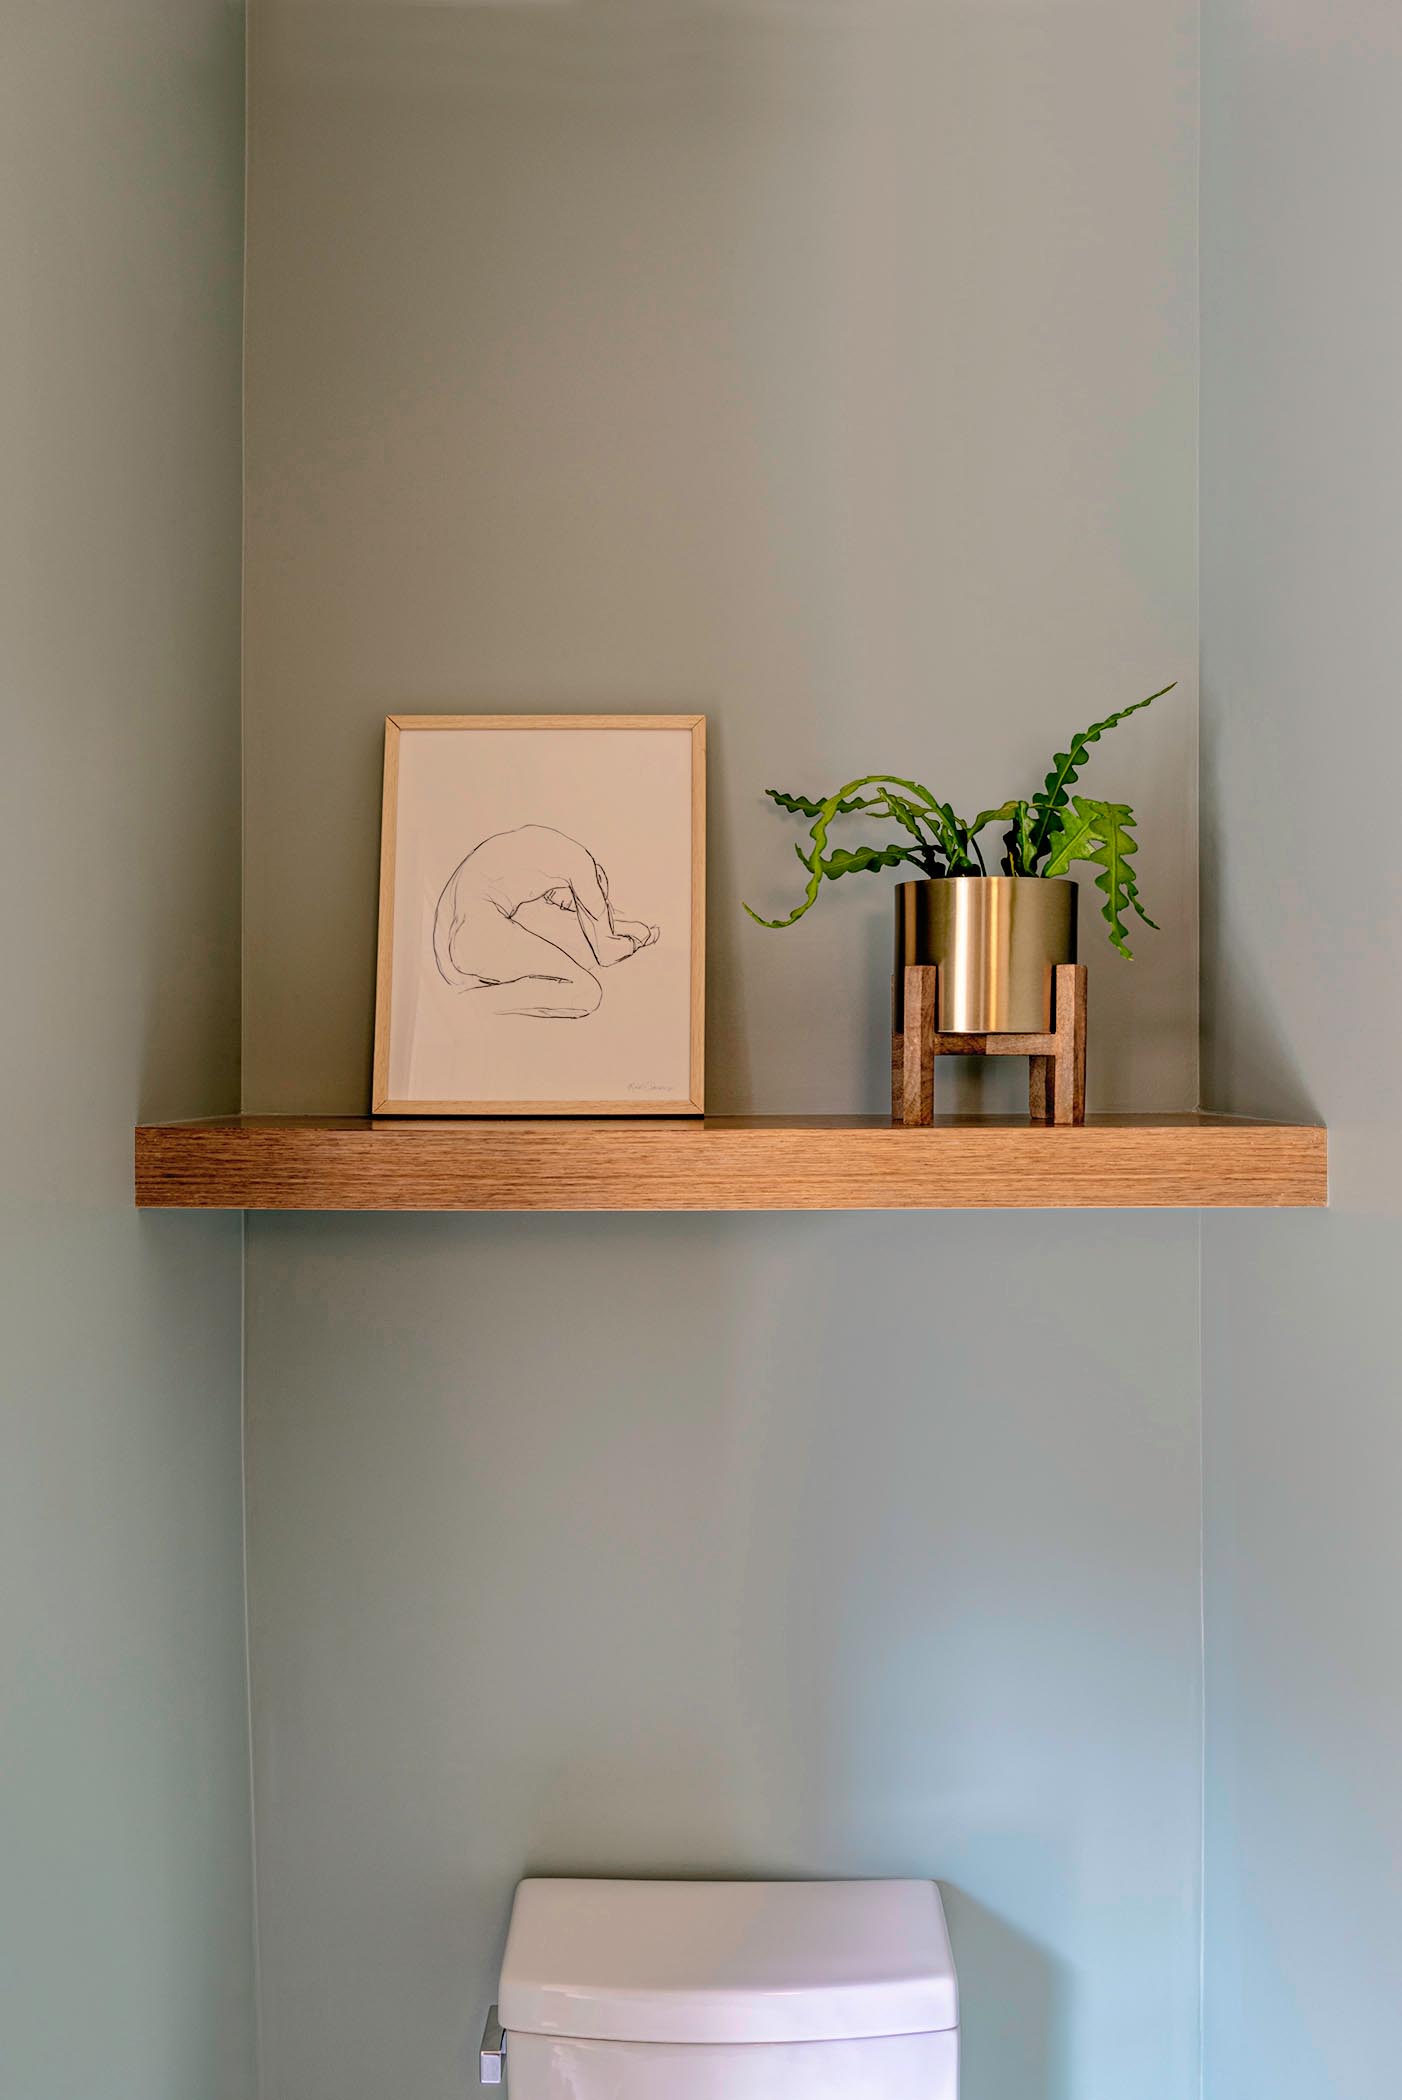 A small powder room with a single wood shelf that showcases art and a plant.